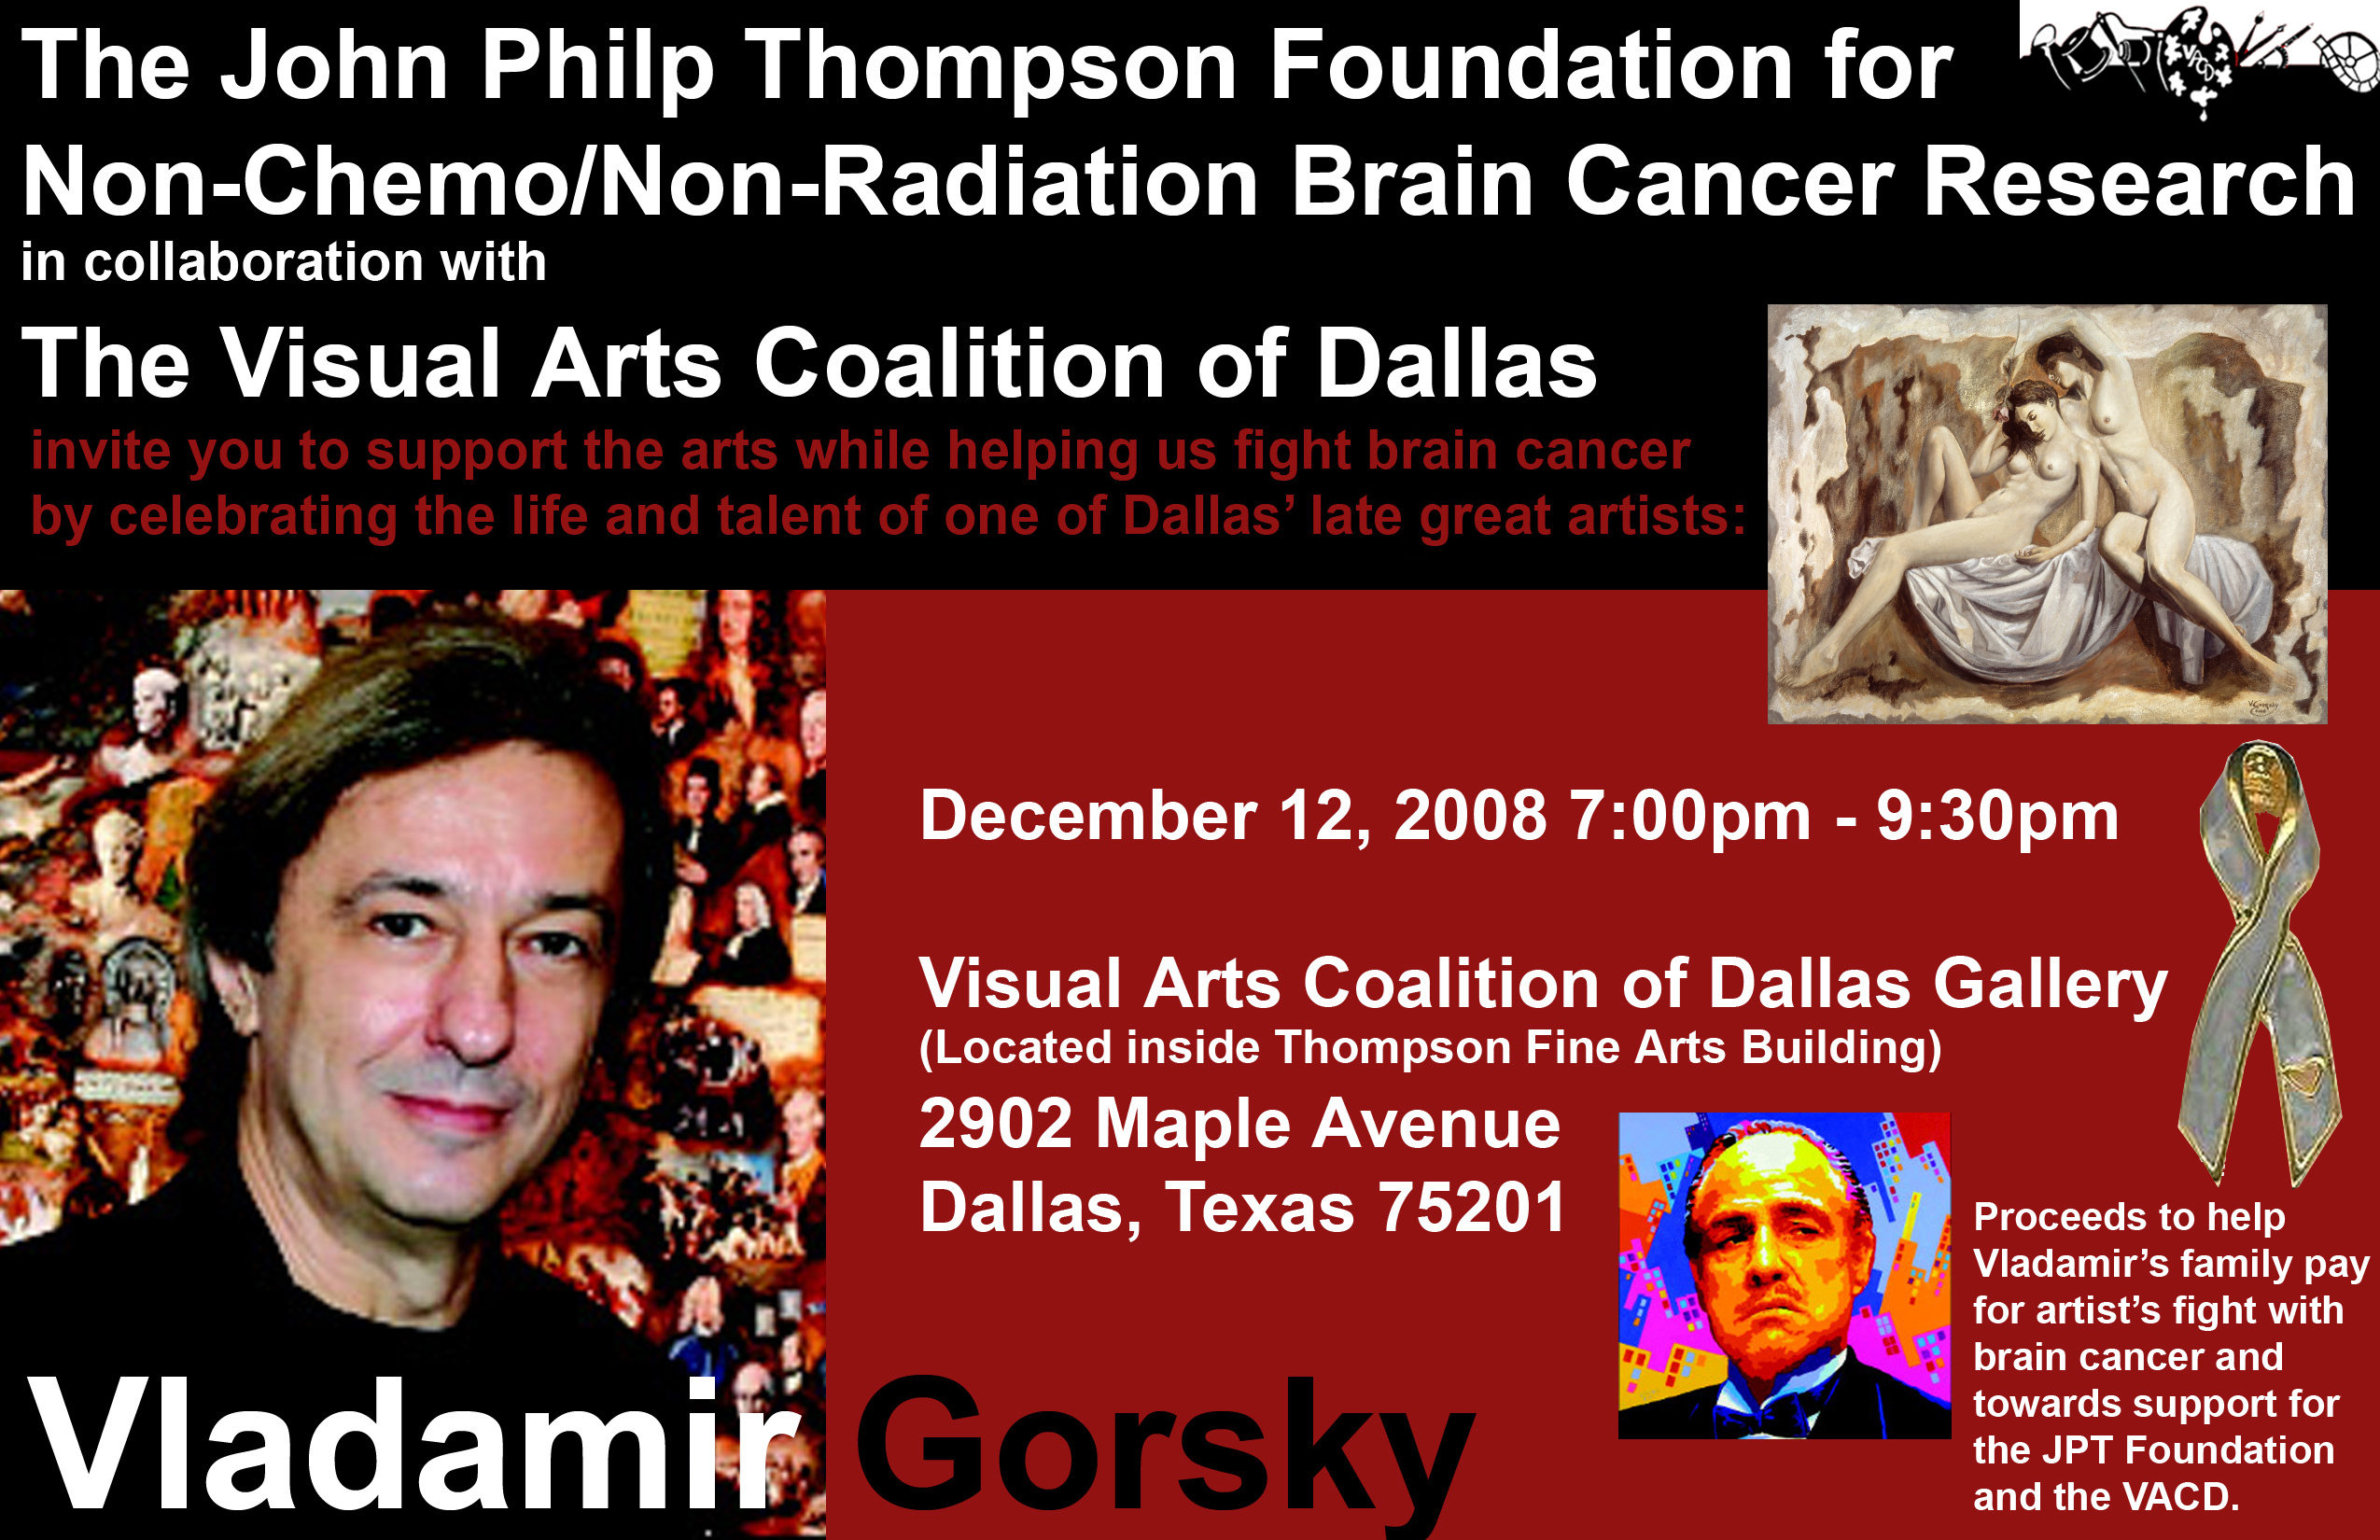 The John Philp Thompson Foundation for Non-Chemotherapy/Non-Radiation Brain Cancer Research in collaboration with The Visual Arts Coalition of Dallas, invite you to support the arts while helping us fight brain cancer by celebrating the life and talent of one of Dallas' late great artists: Vladamir Gosrsky. the opening night of the show will be December 12th 2008 at 7pm - 9:30pm. Proceeds will go towards helping Vladamir Gorsky's family pay for artist's fight with brain cancer and towards support for the JPT Foundation and the VACD.  Click here to learn more about this incredible artist!